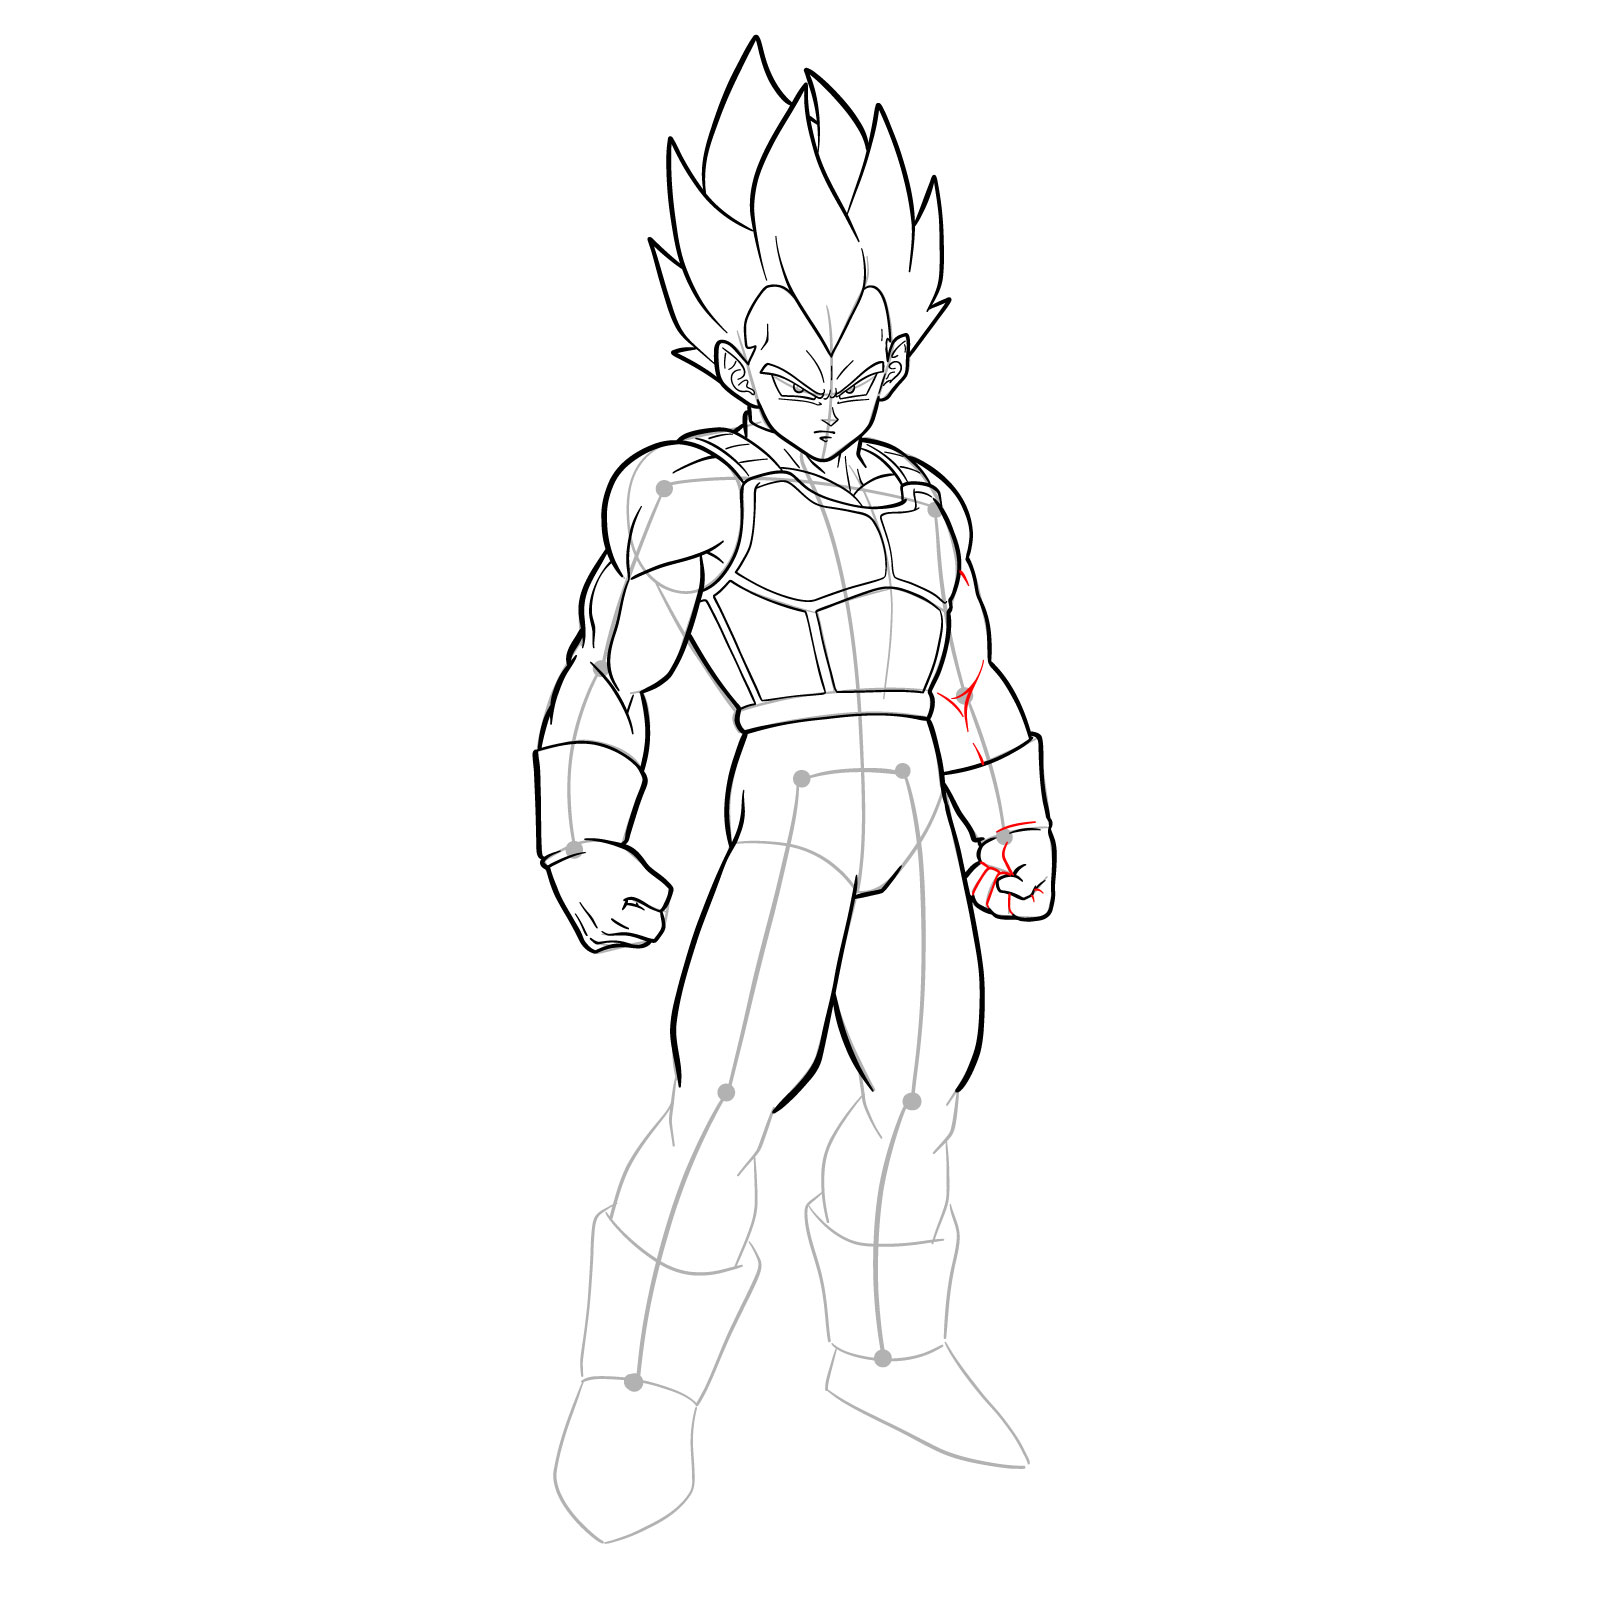 How to draw Vegeta in SSGSS - step 34